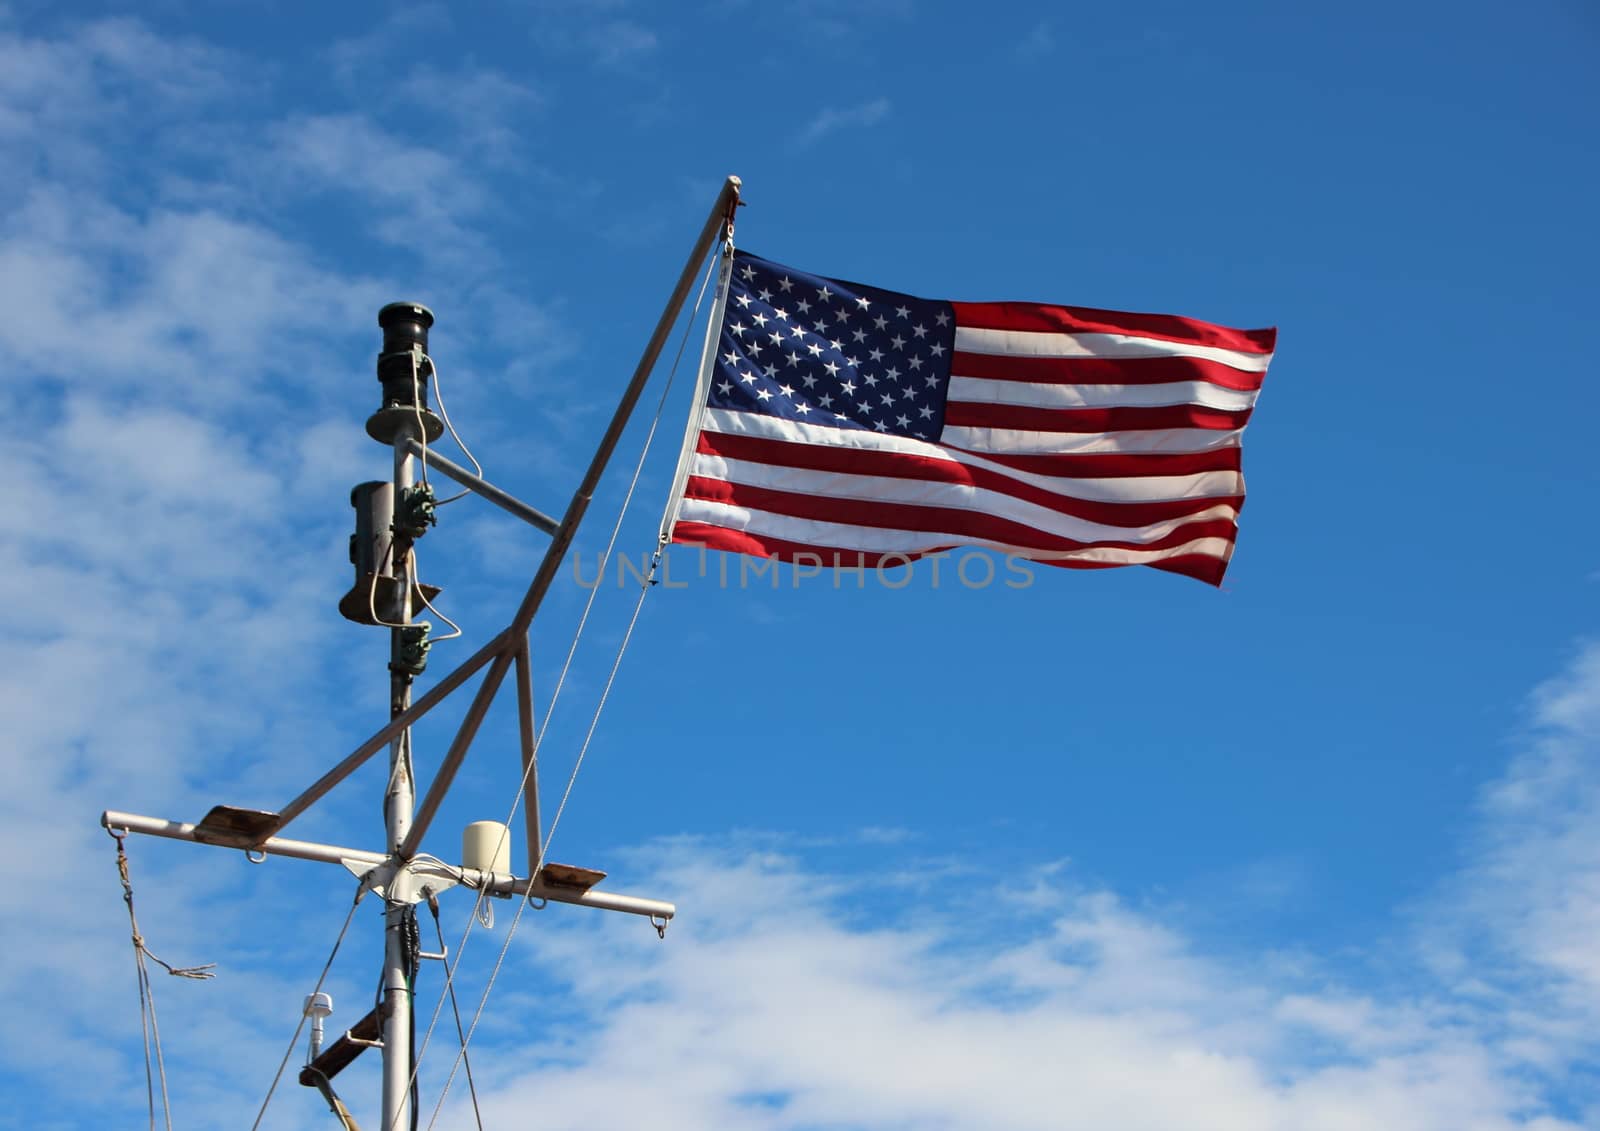 Maritime American Stars and Stripes Flag on Ship Pole by HoleInTheBox